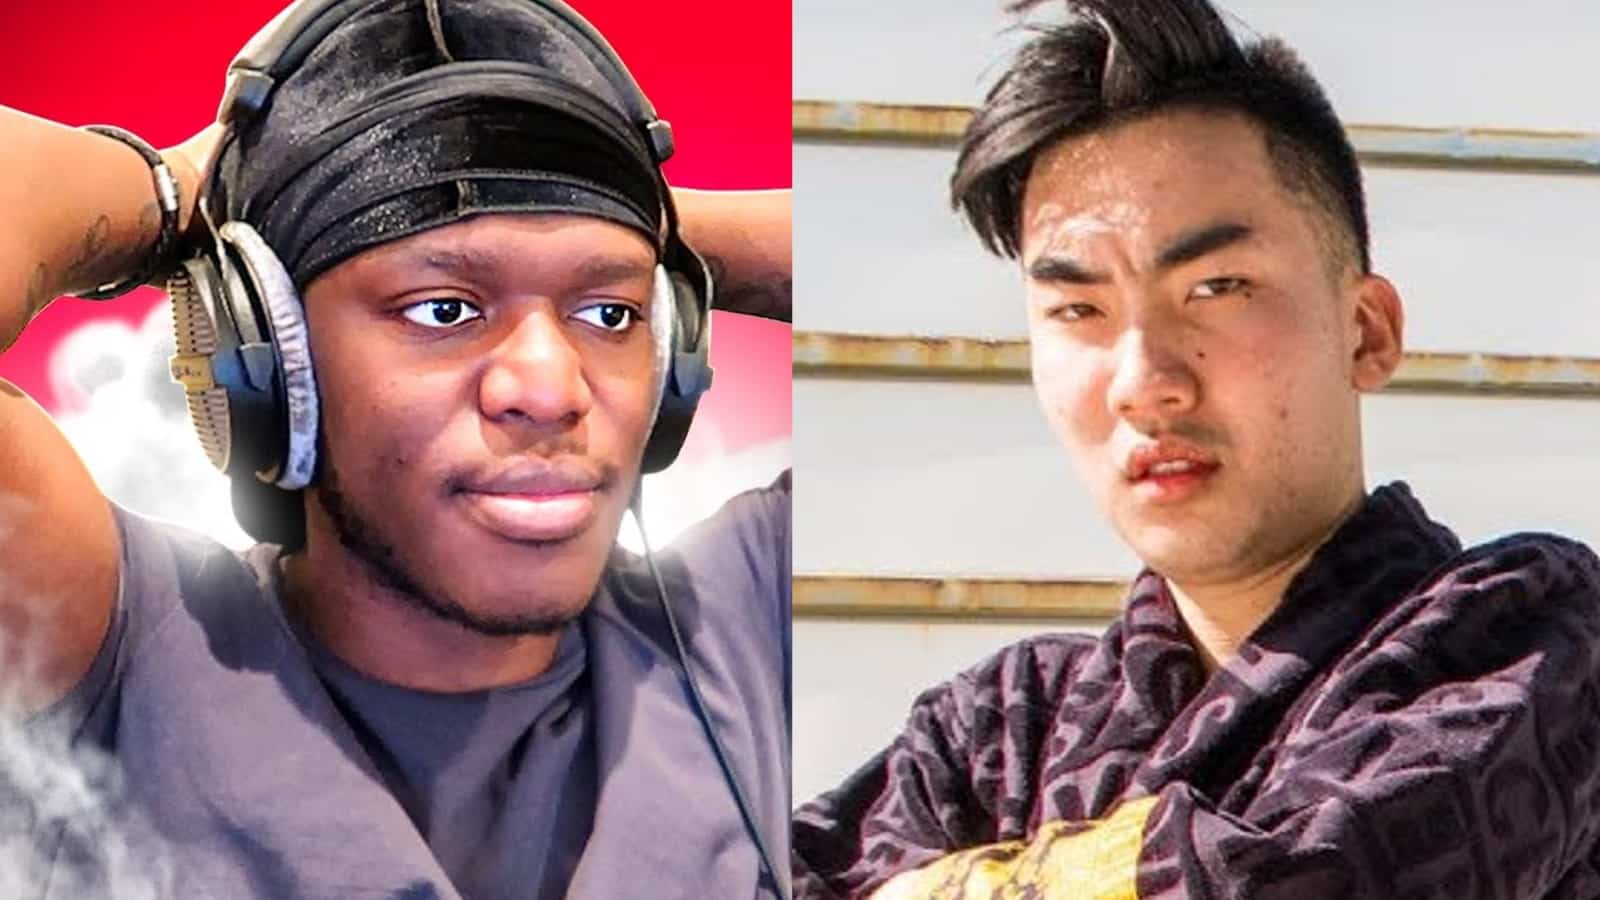 Ksi Hits Back At Ricegum S “weird” Comments About His Girlfriend And Music Career Dexerto